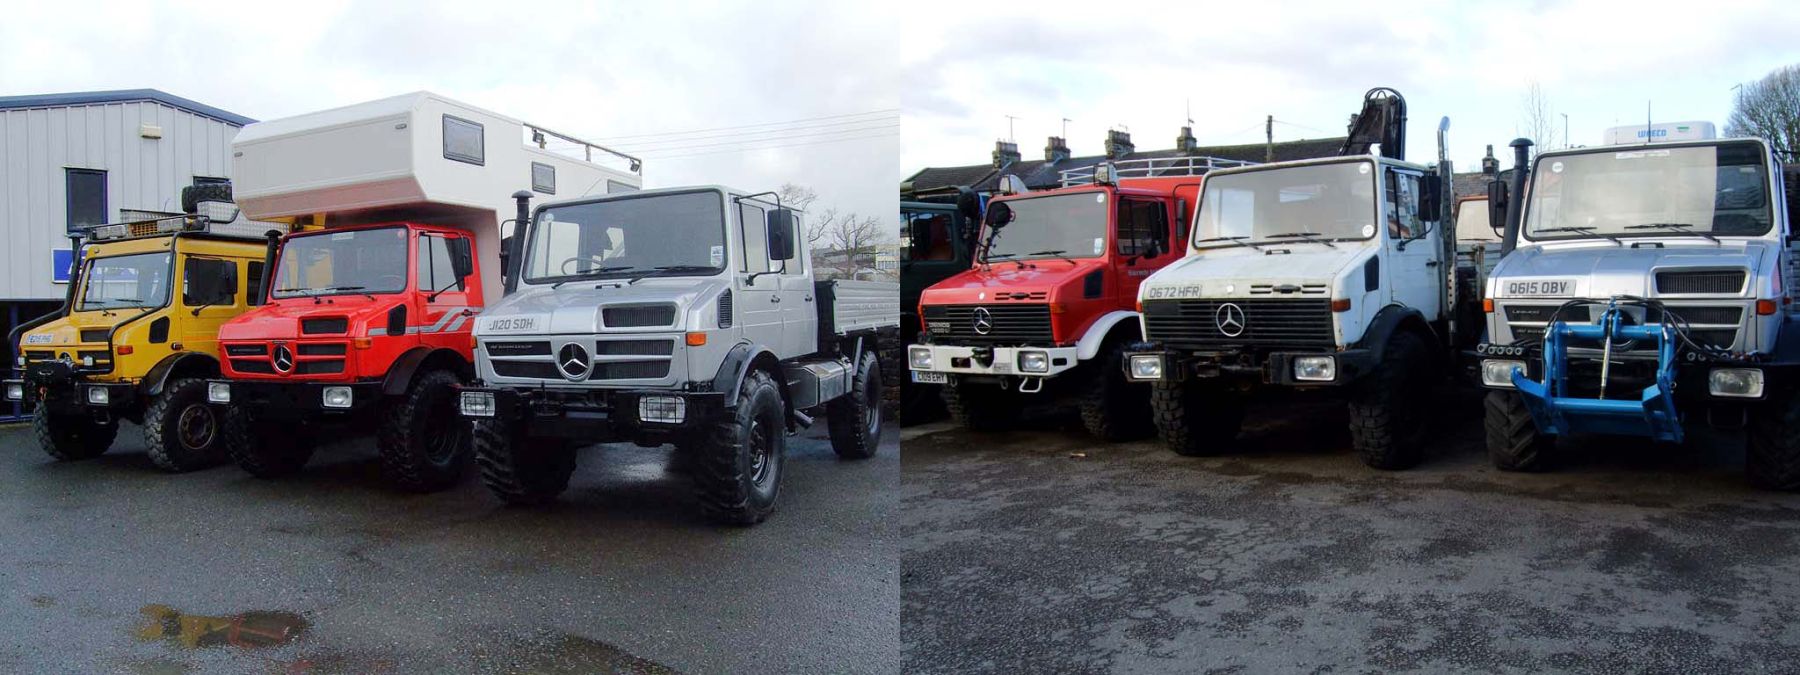 To See Unimog Comparison We're the Place to Be